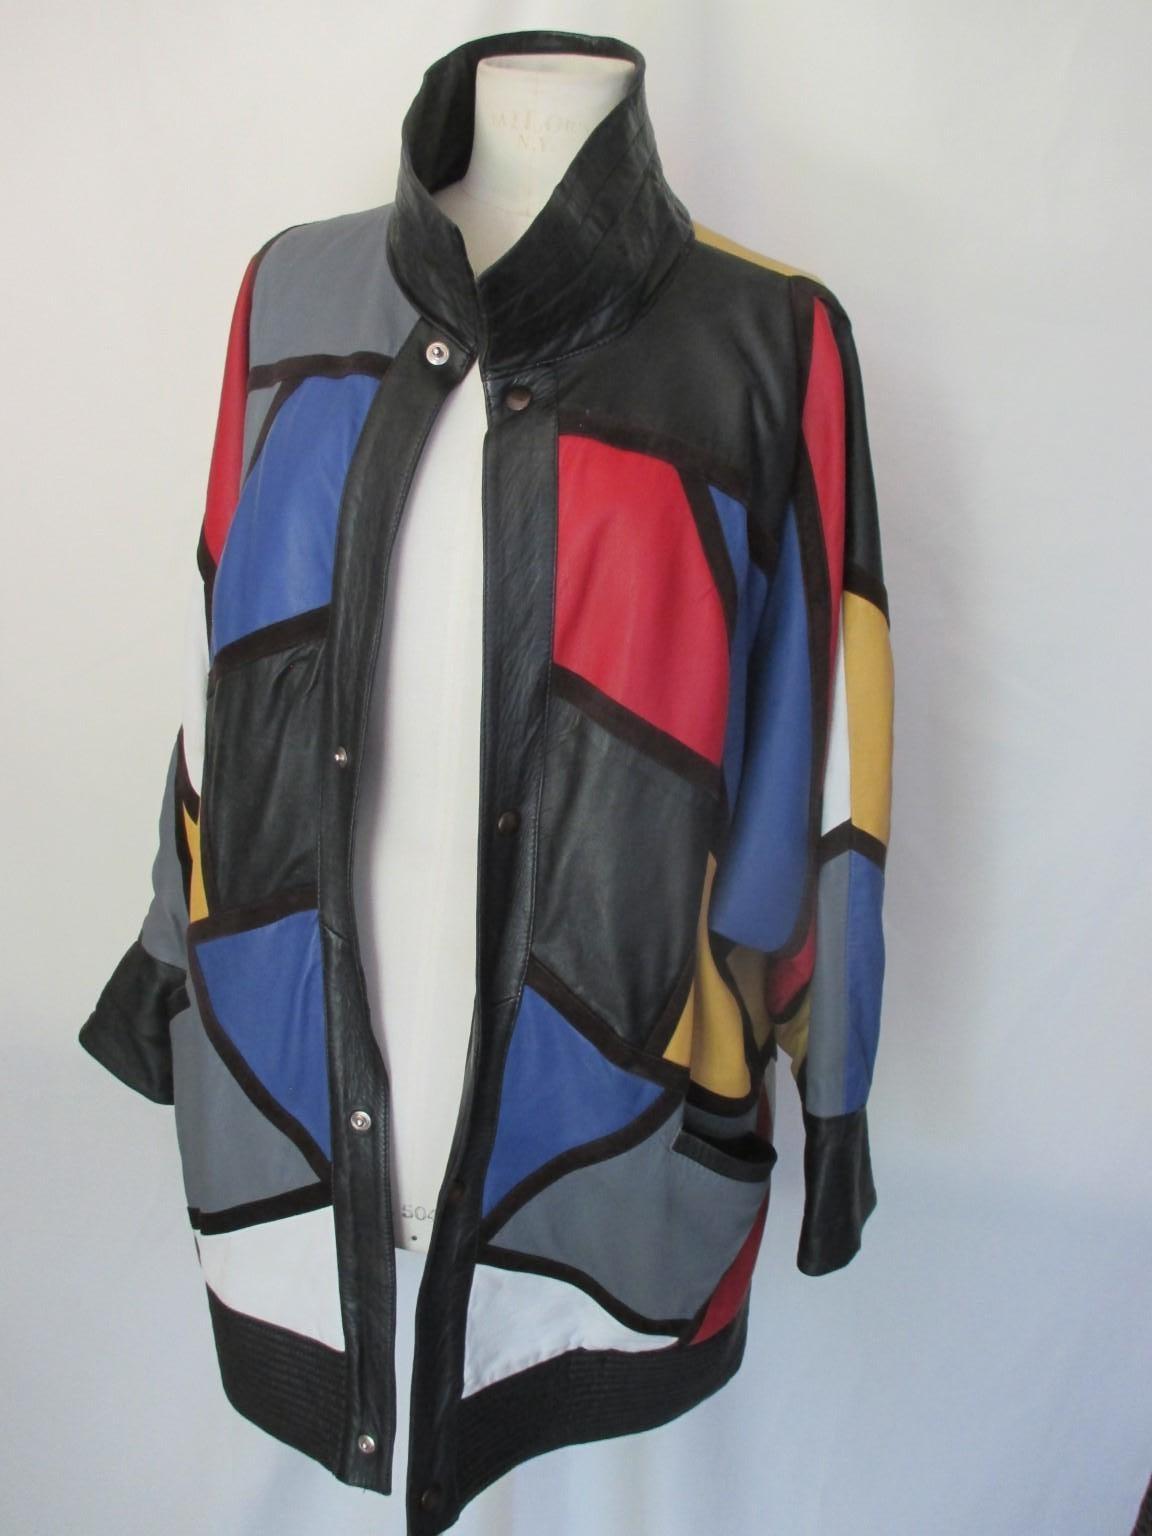 Yves Saint Laurent Piet Mondrian Art Leather Coat  In Good Condition For Sale In Amsterdam, NL